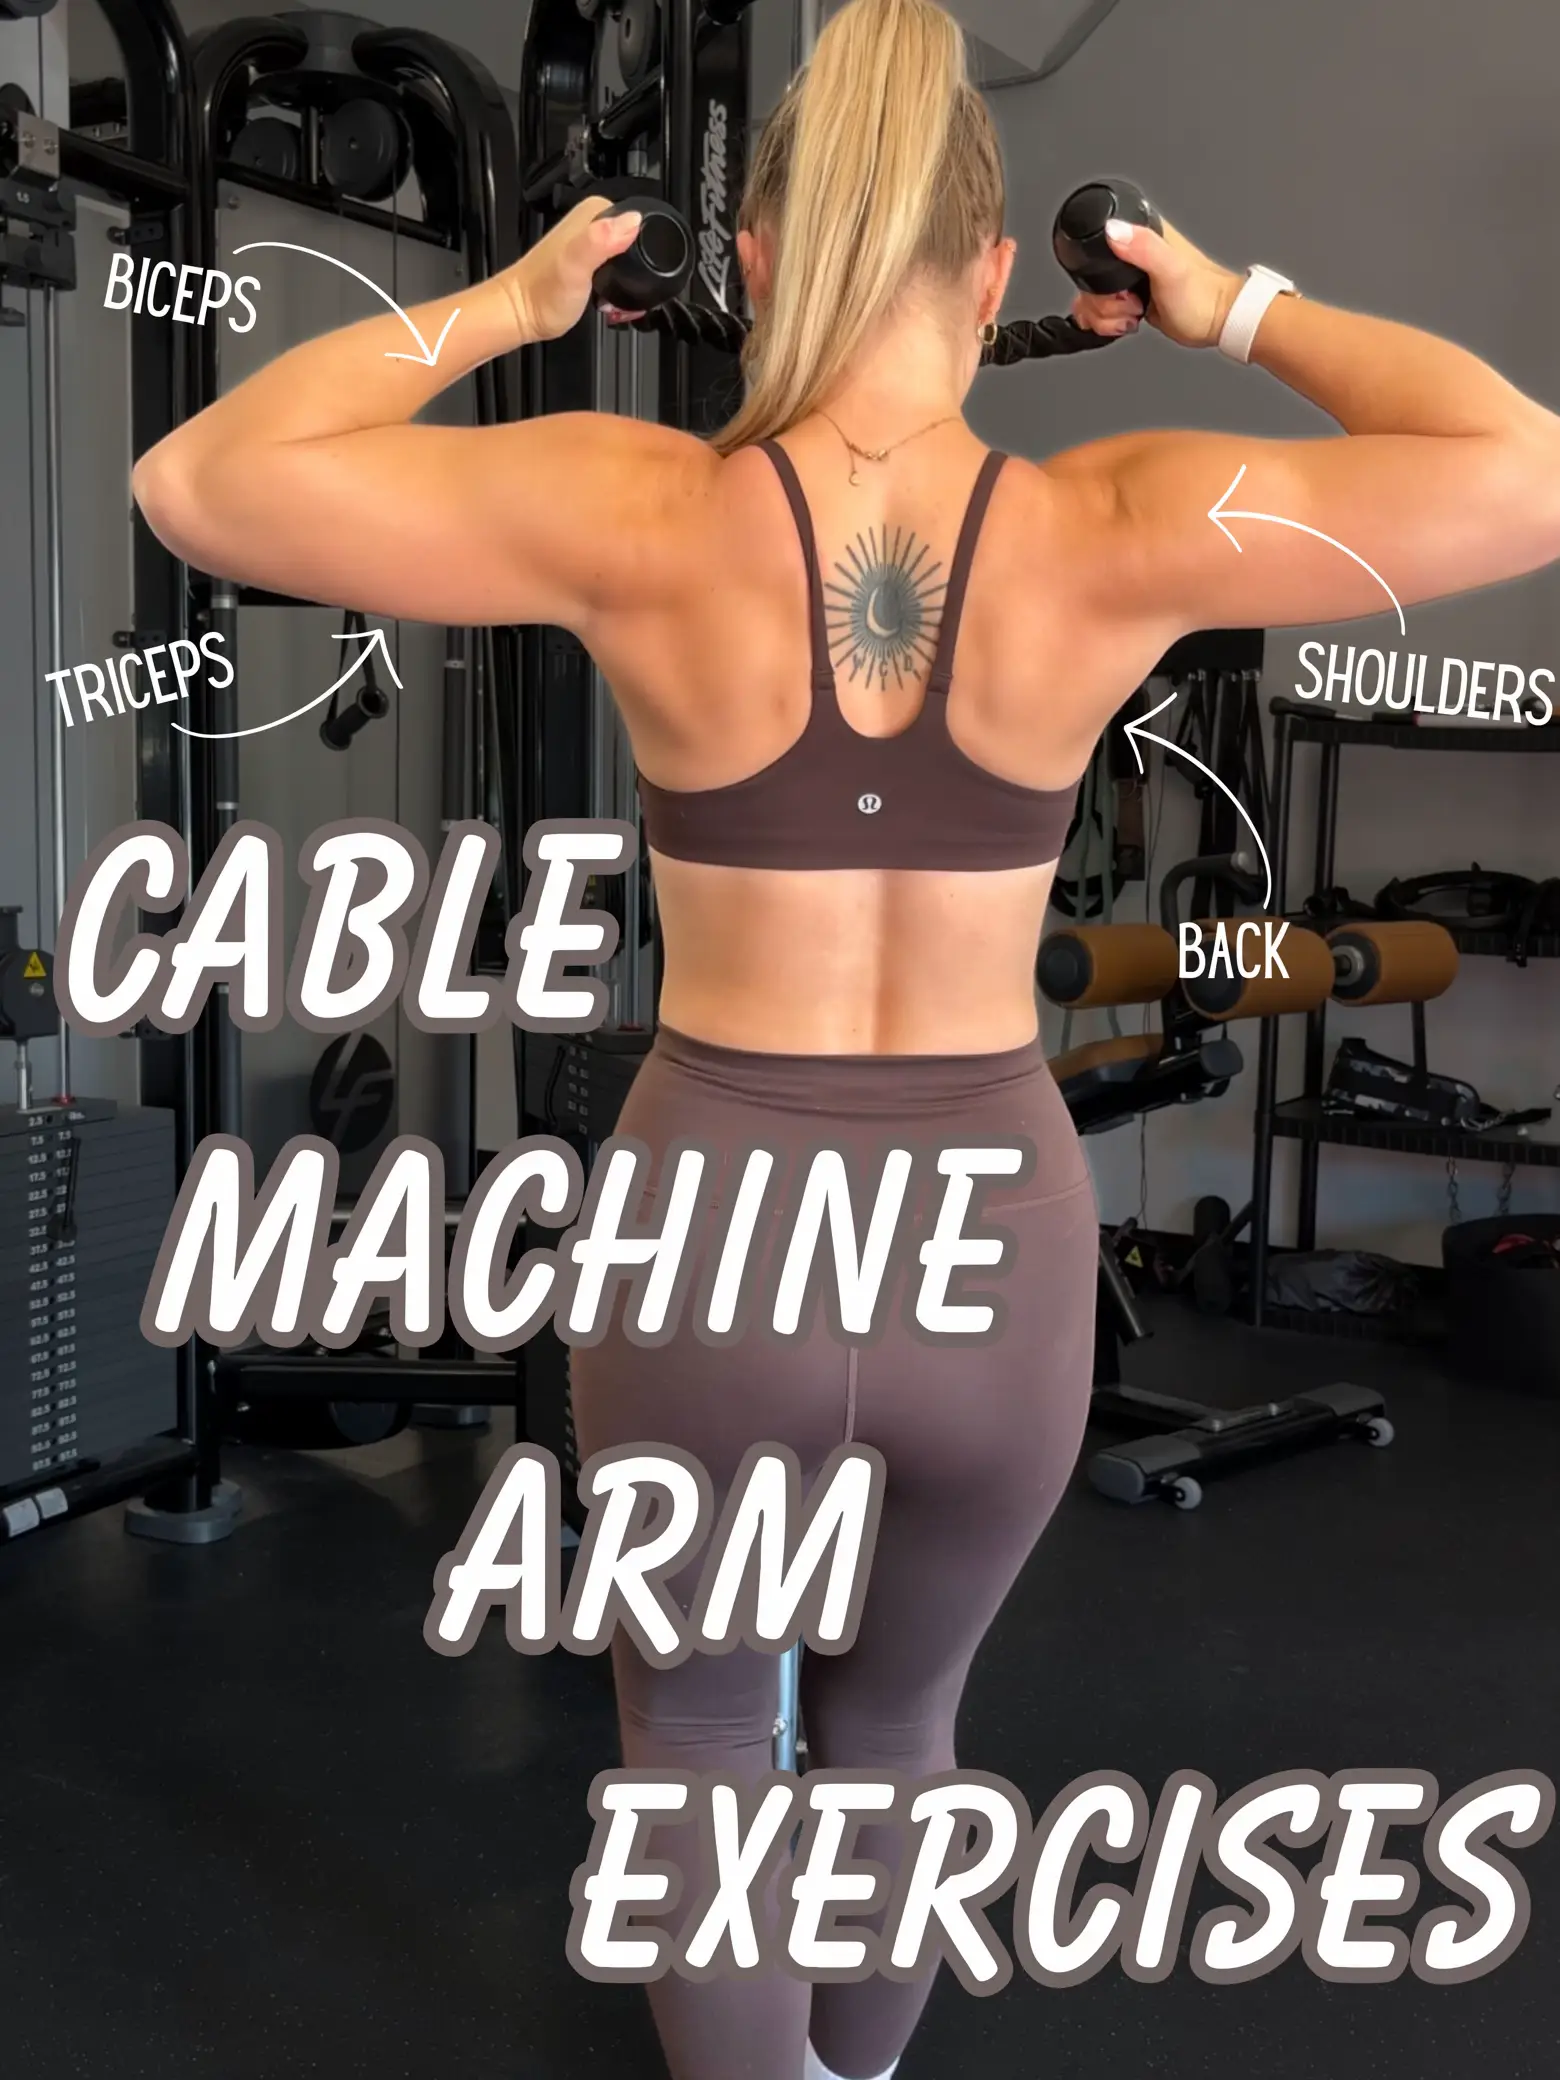 Strong arms workout 🔥 I love doing arm exercises on the cable